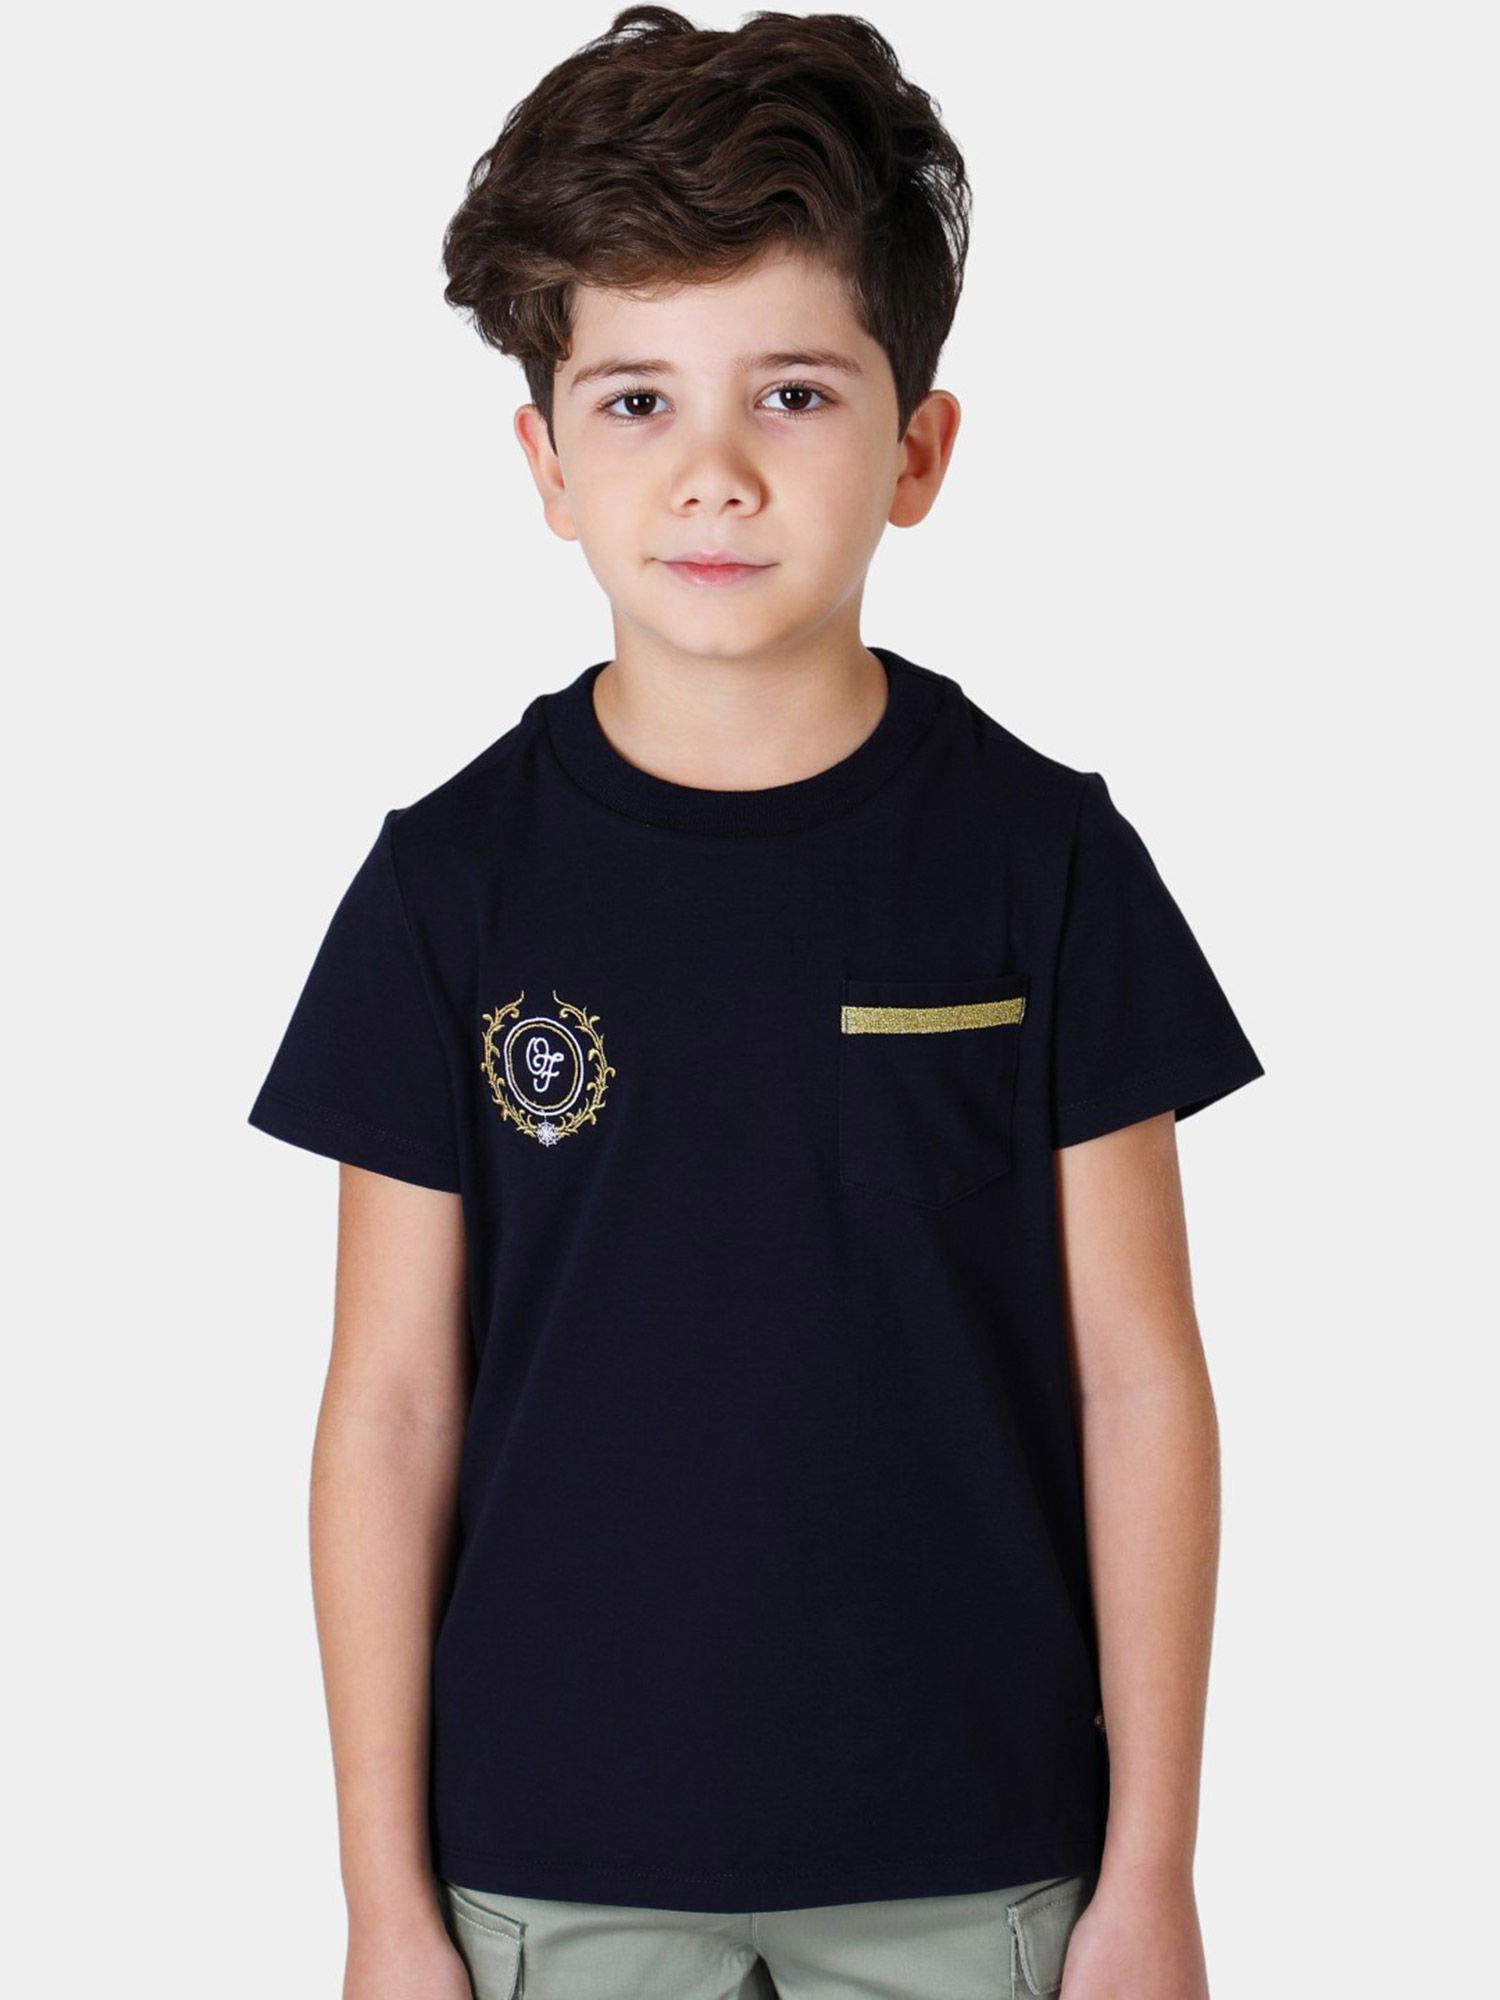 navy blue solid t-shirt